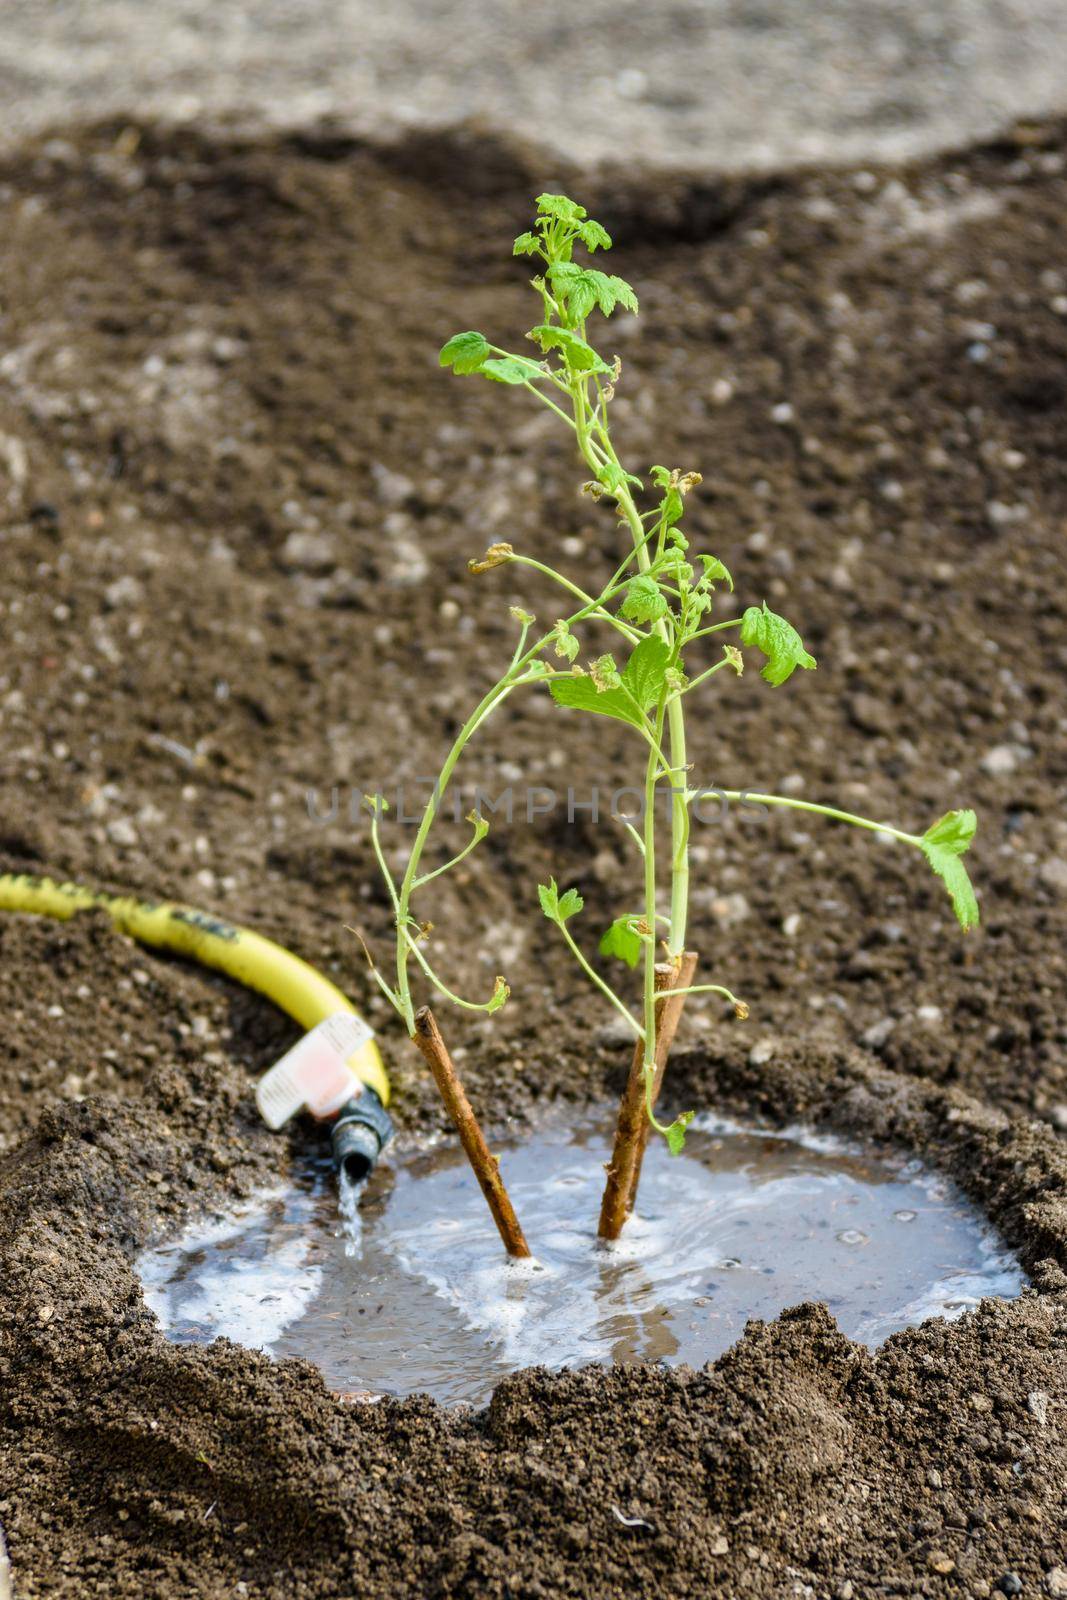 Watering a freshly planted currant seedling on the background of the weeded earth